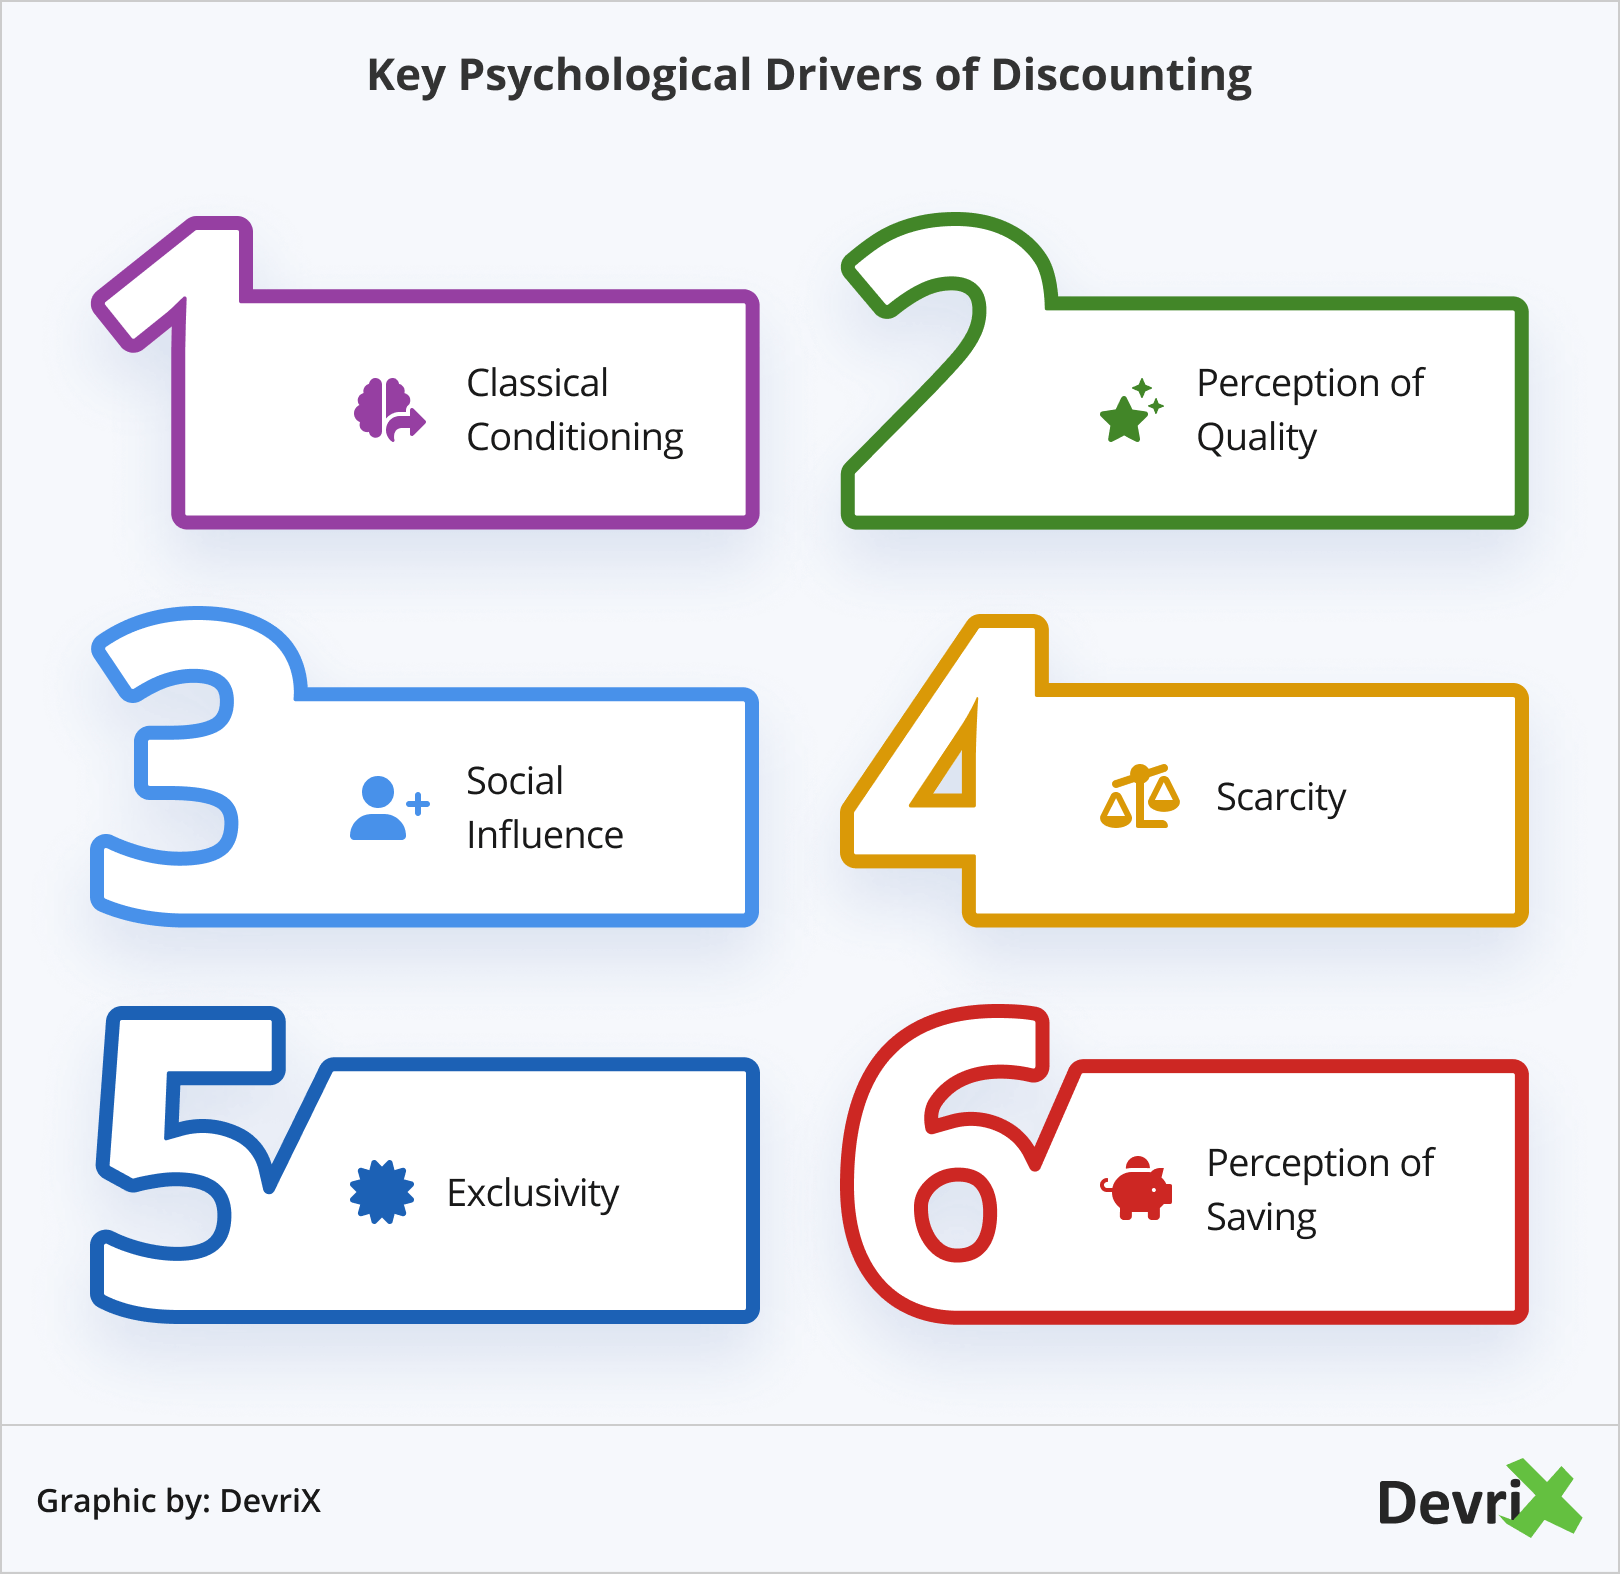 Key Psychological Drivers of Discounting